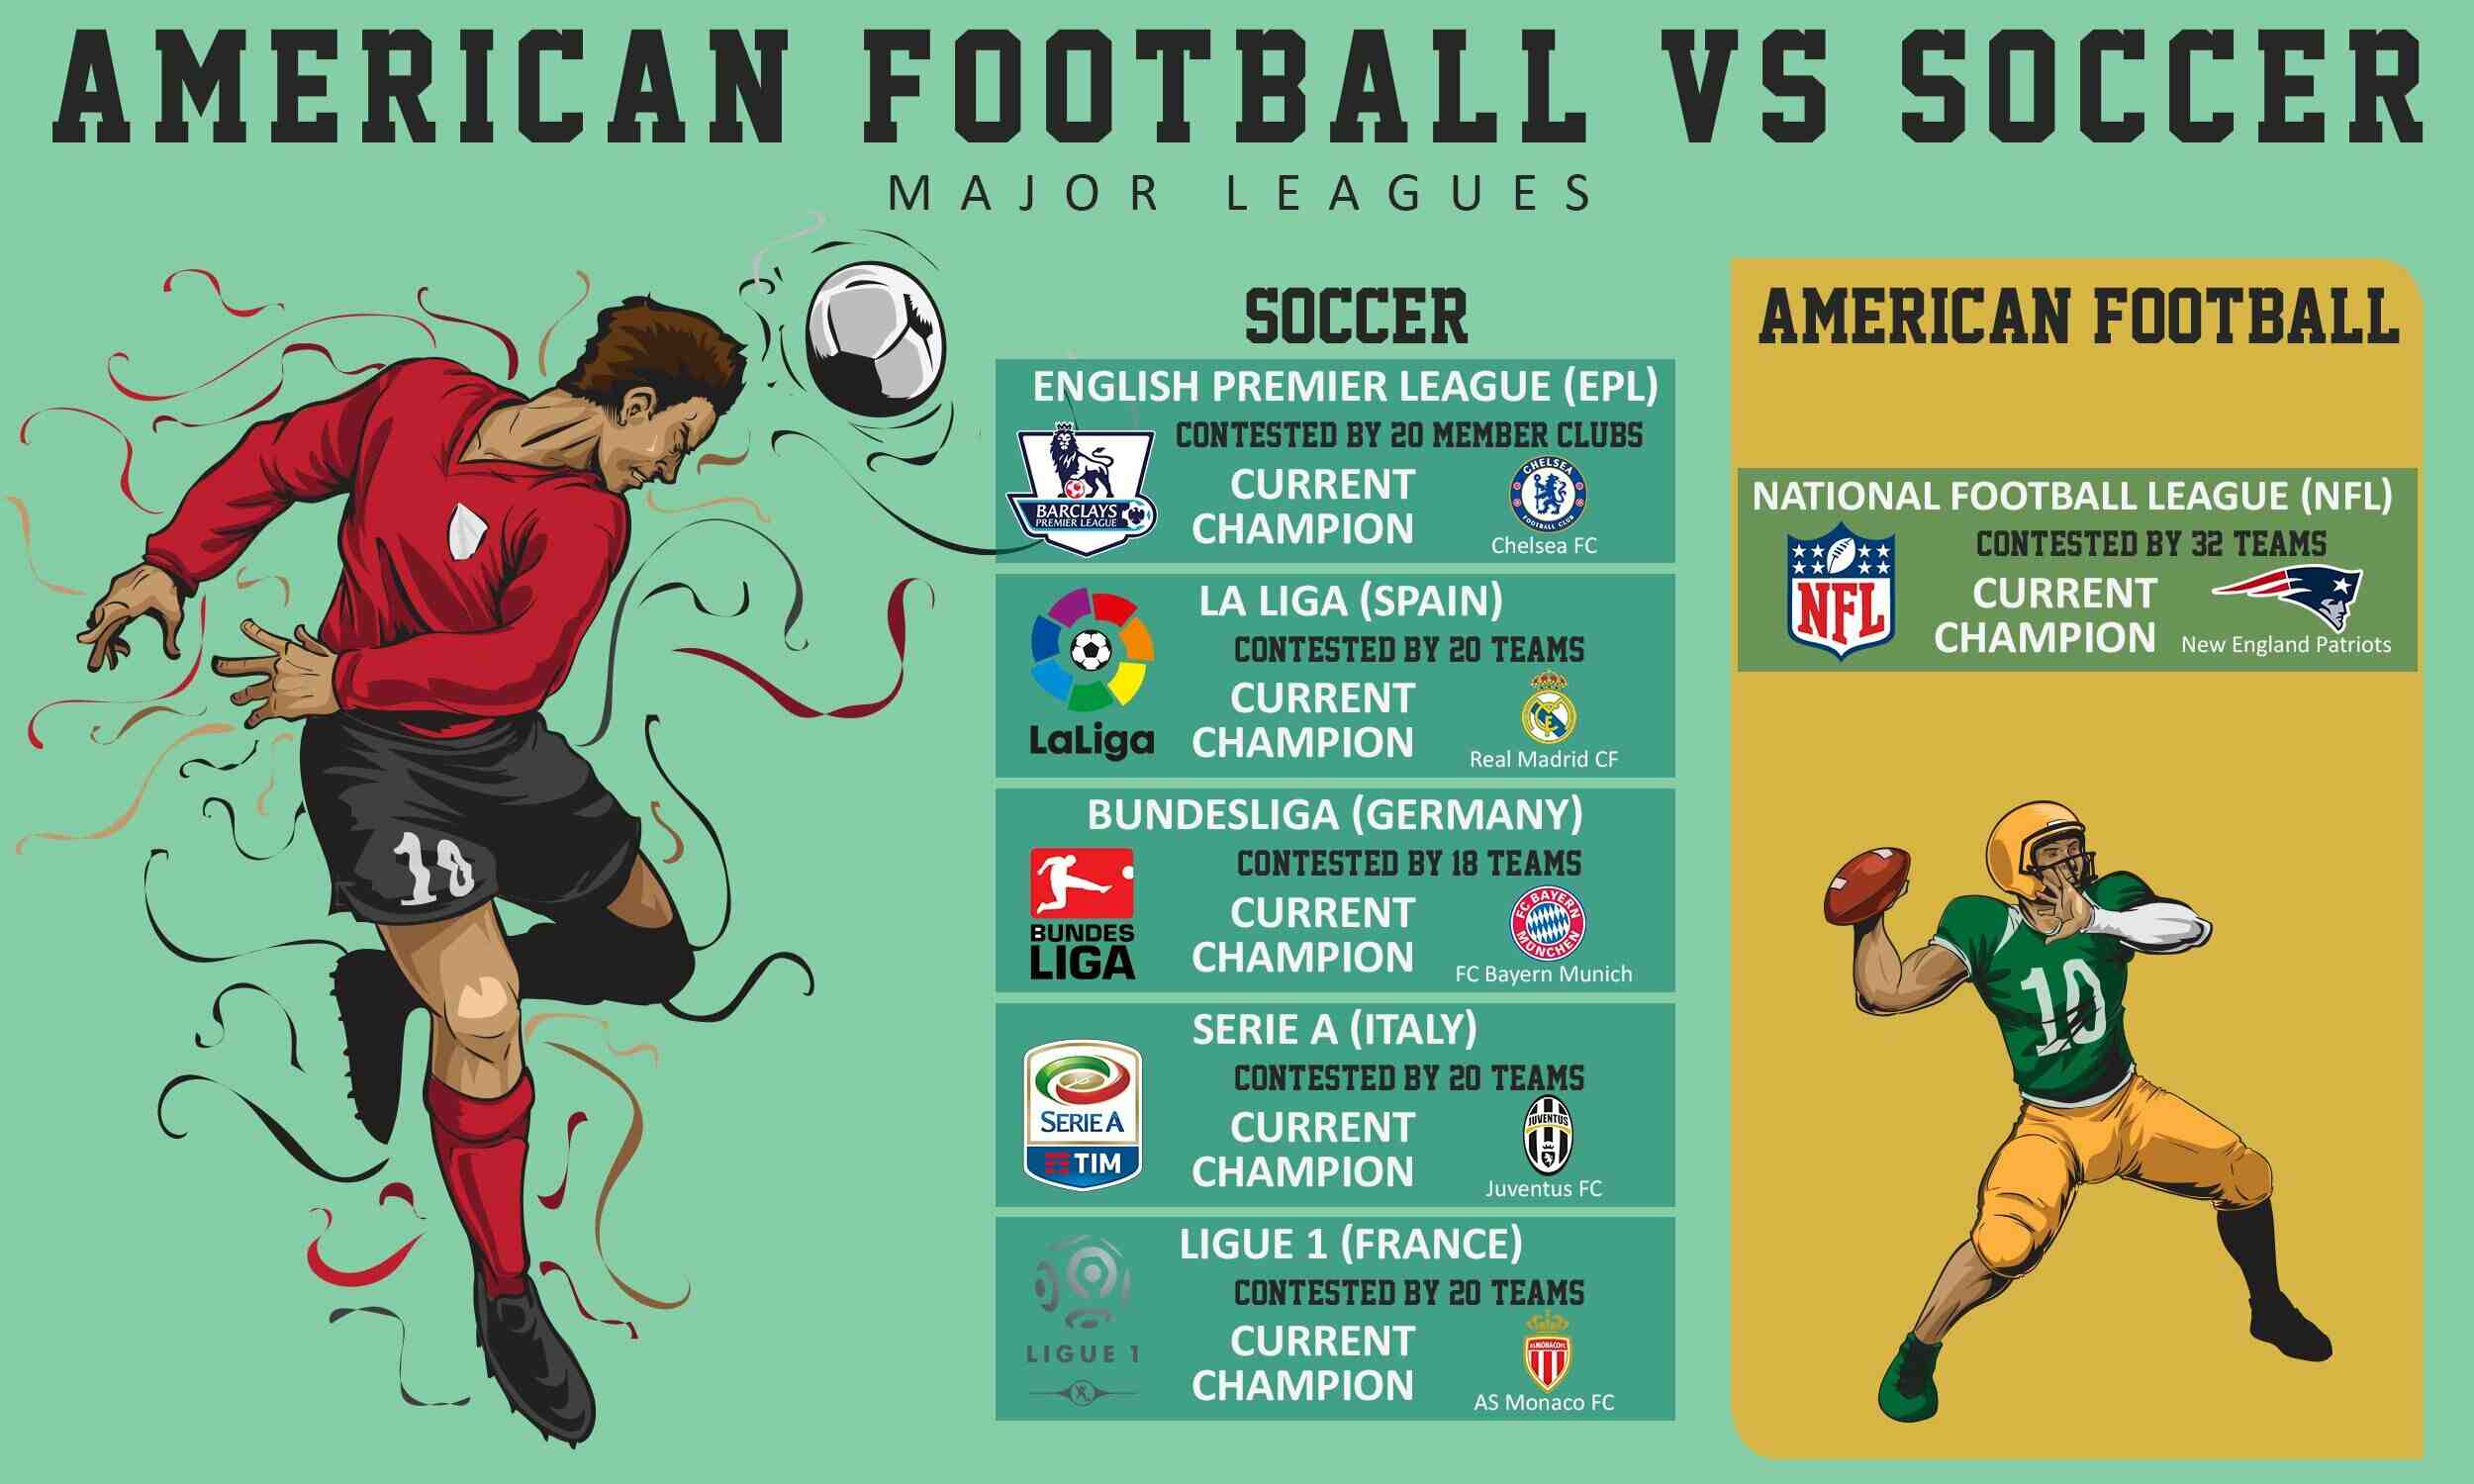 Why do Americans call soccer instead of soccer?